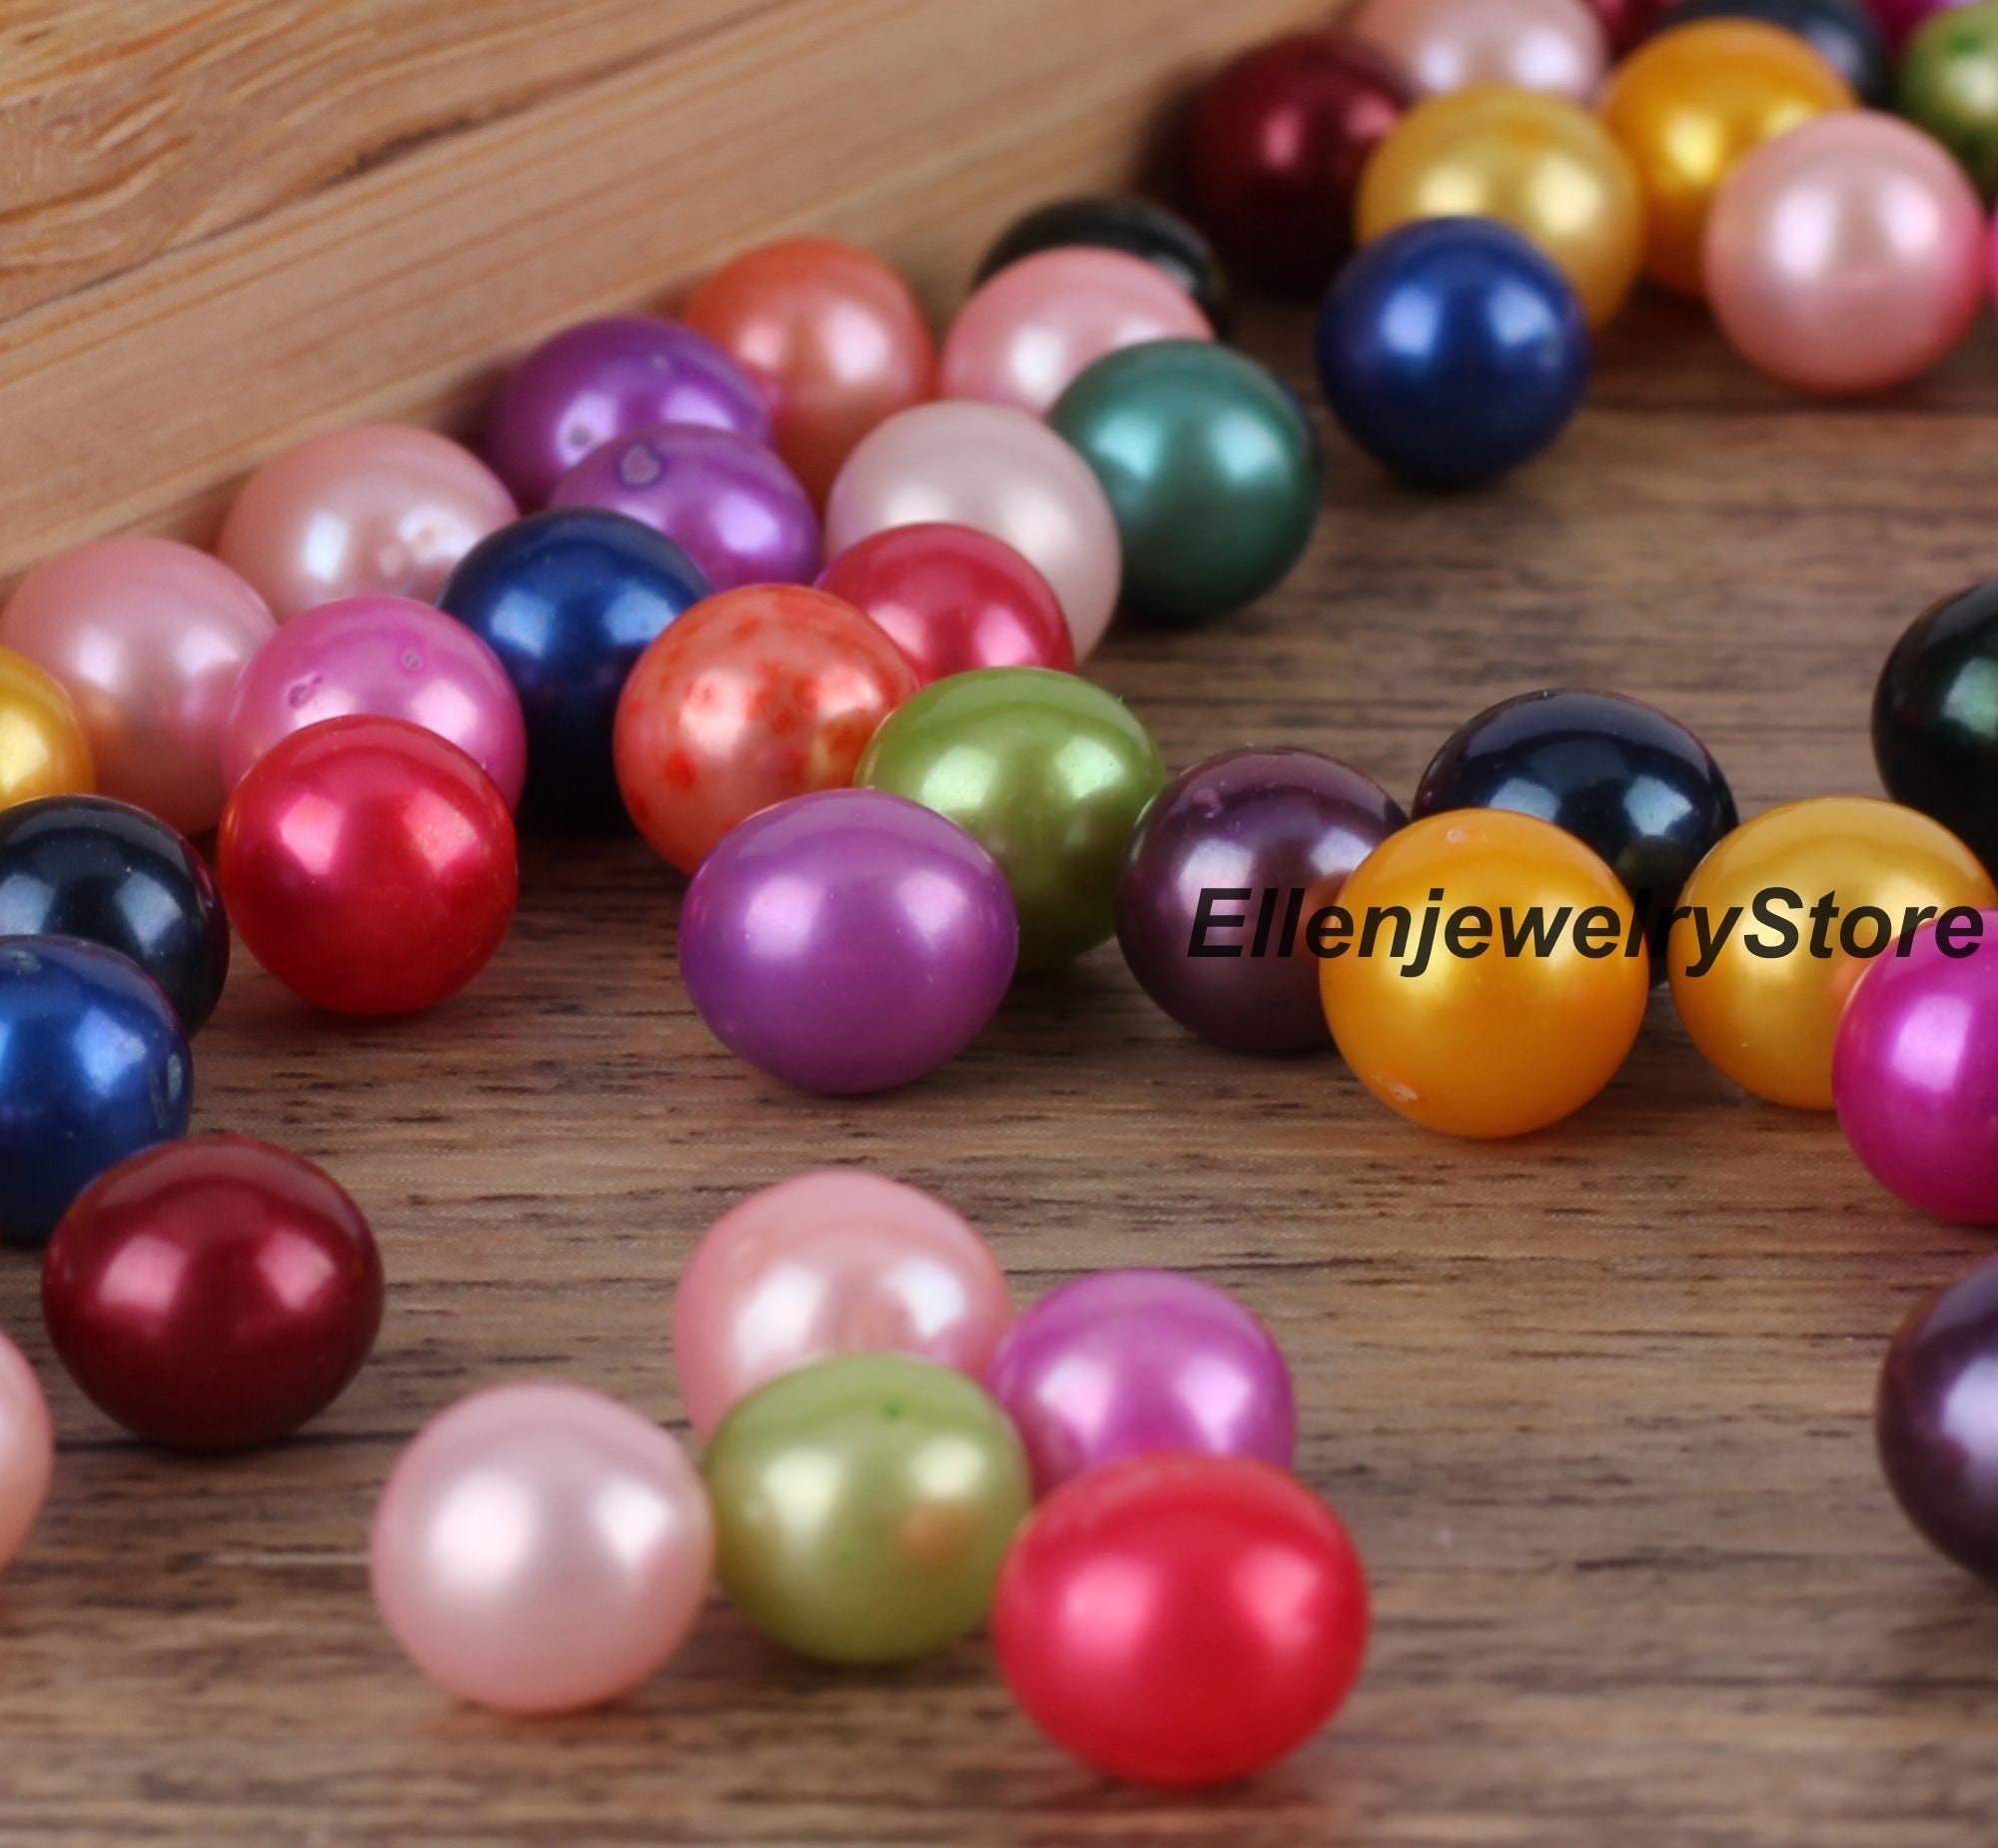 3-6mm Mix Size Acrylic Transition Color Round Pearl Loose Mermaid Beads  Jewelry